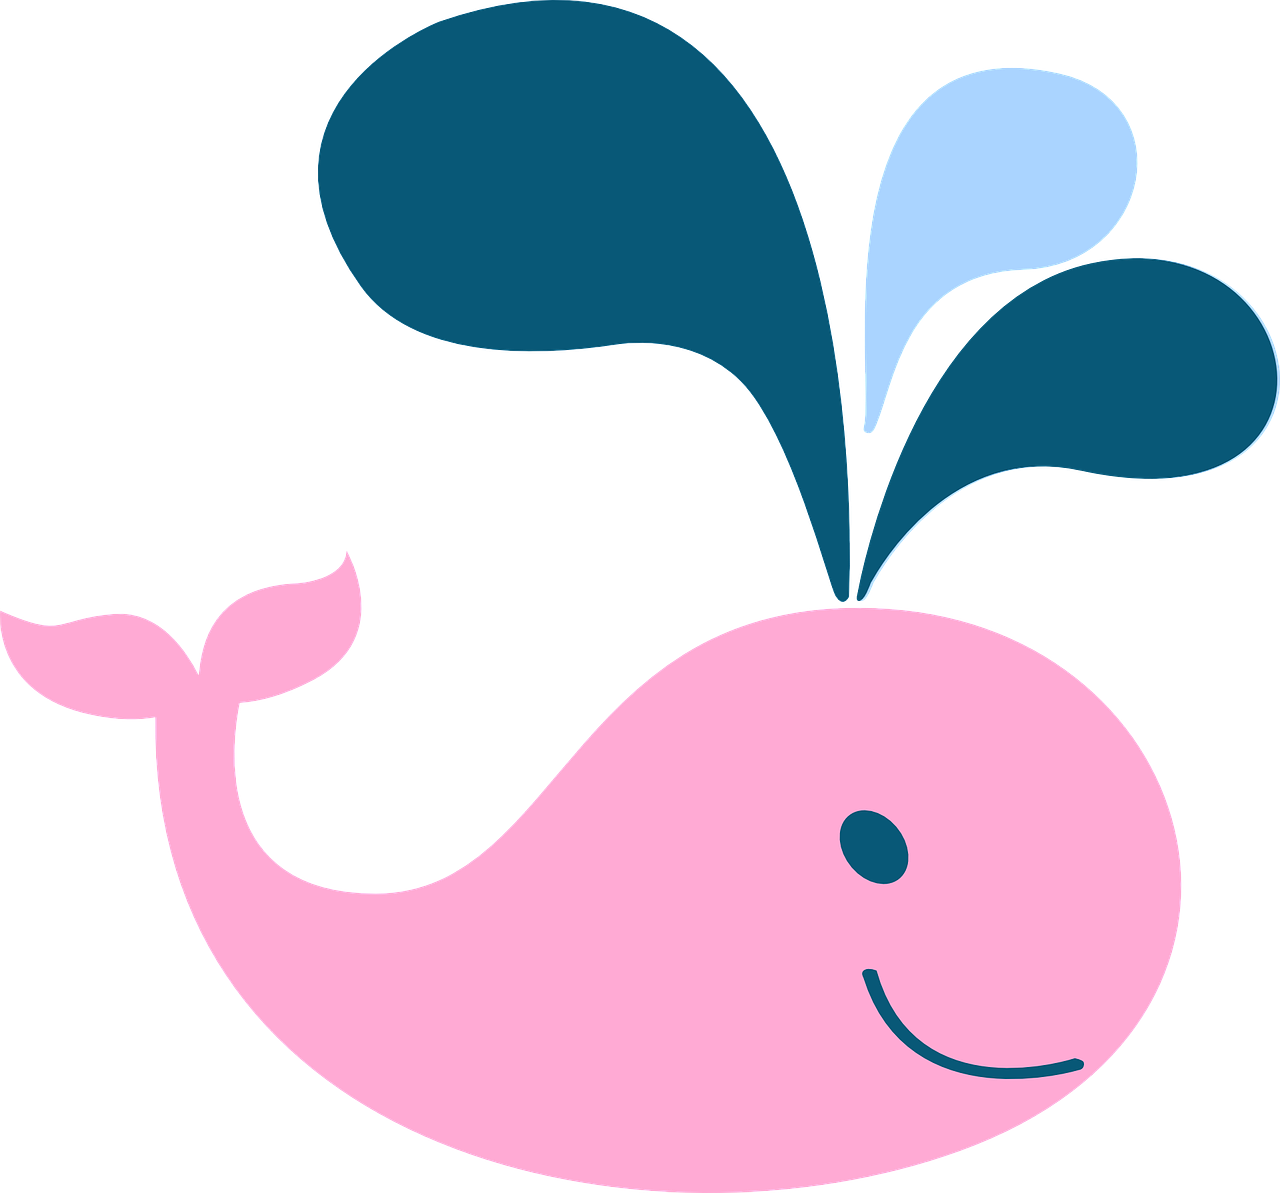 Water clipart party. Free image on pixabay